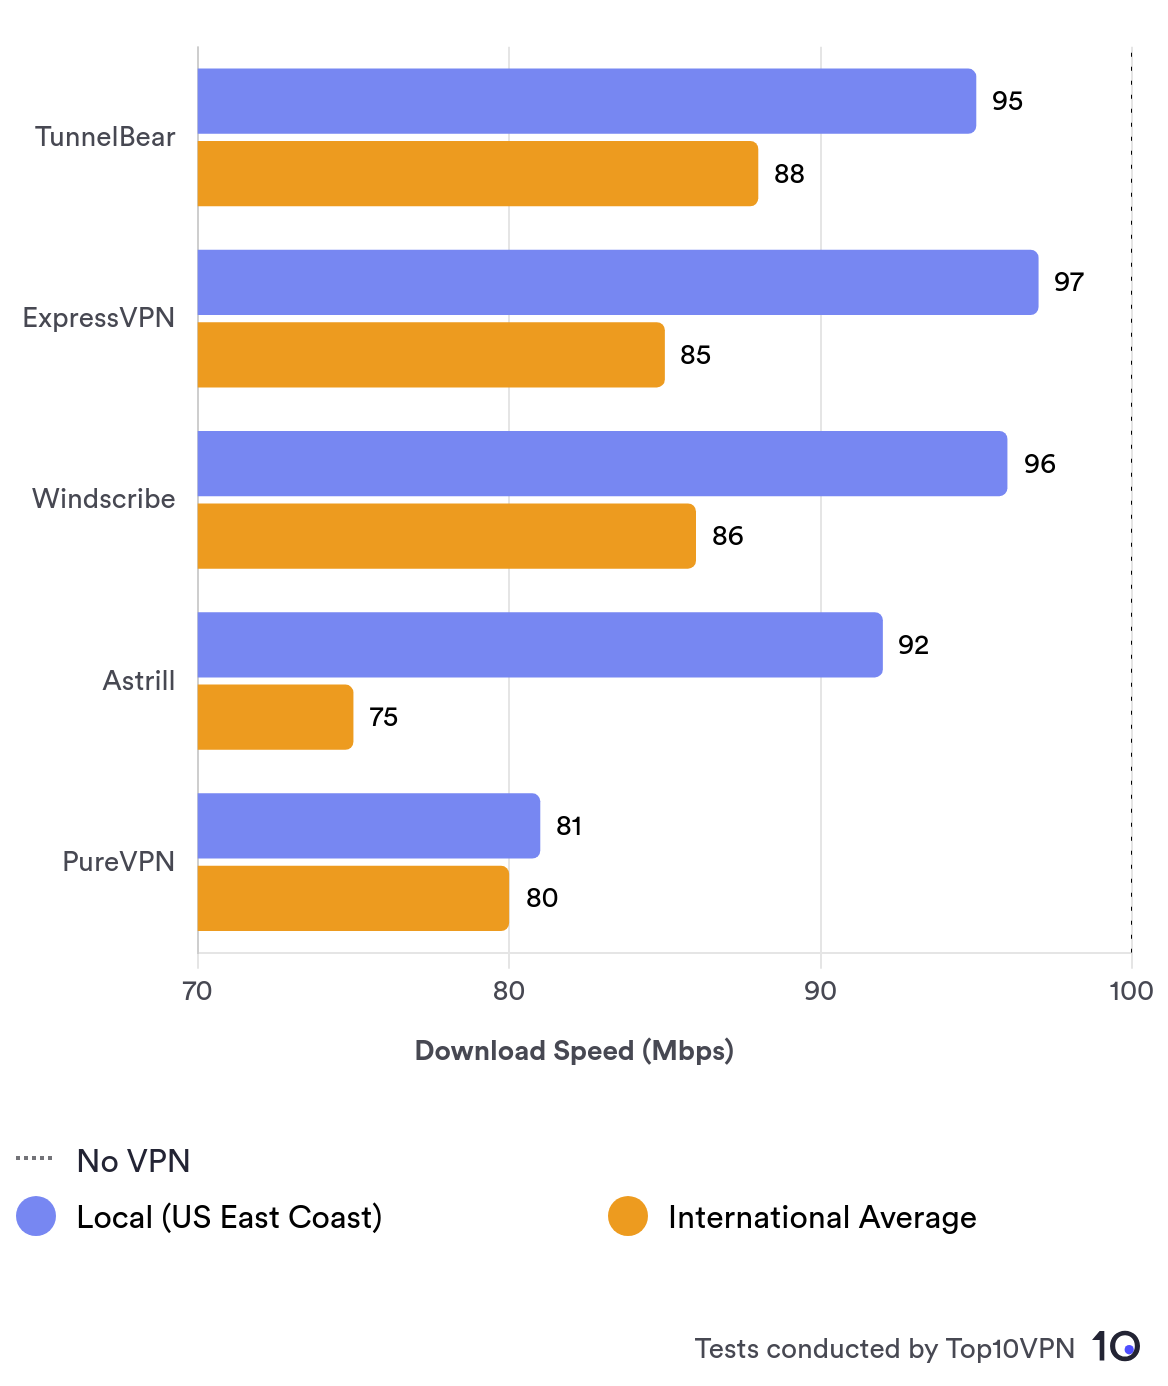 Comparison bar chart showing TunnelBear's local speed performance against other leading VPN services.